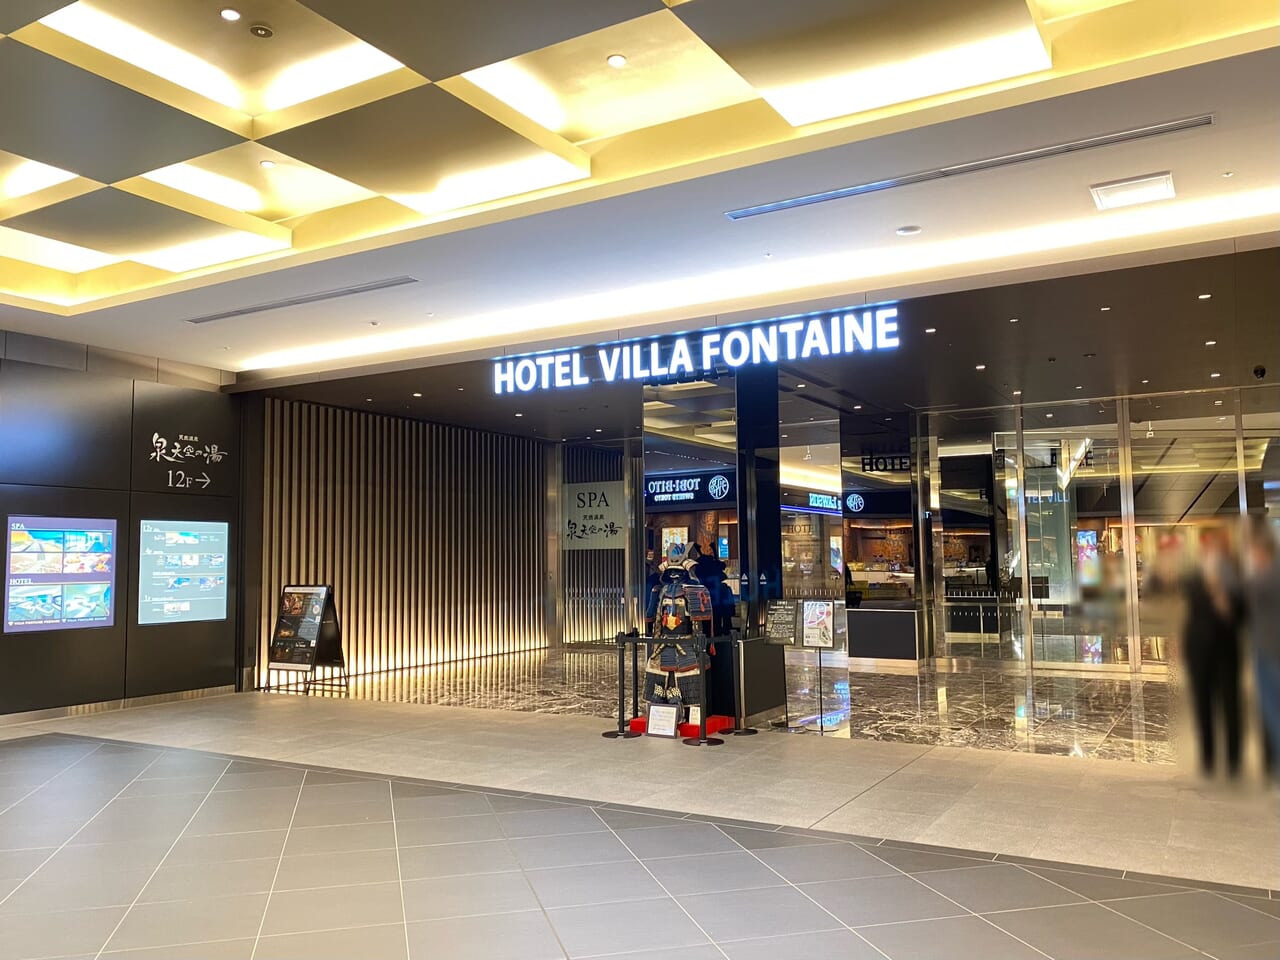 「SPORTS BAR by Villa Fontaine」がOPEN